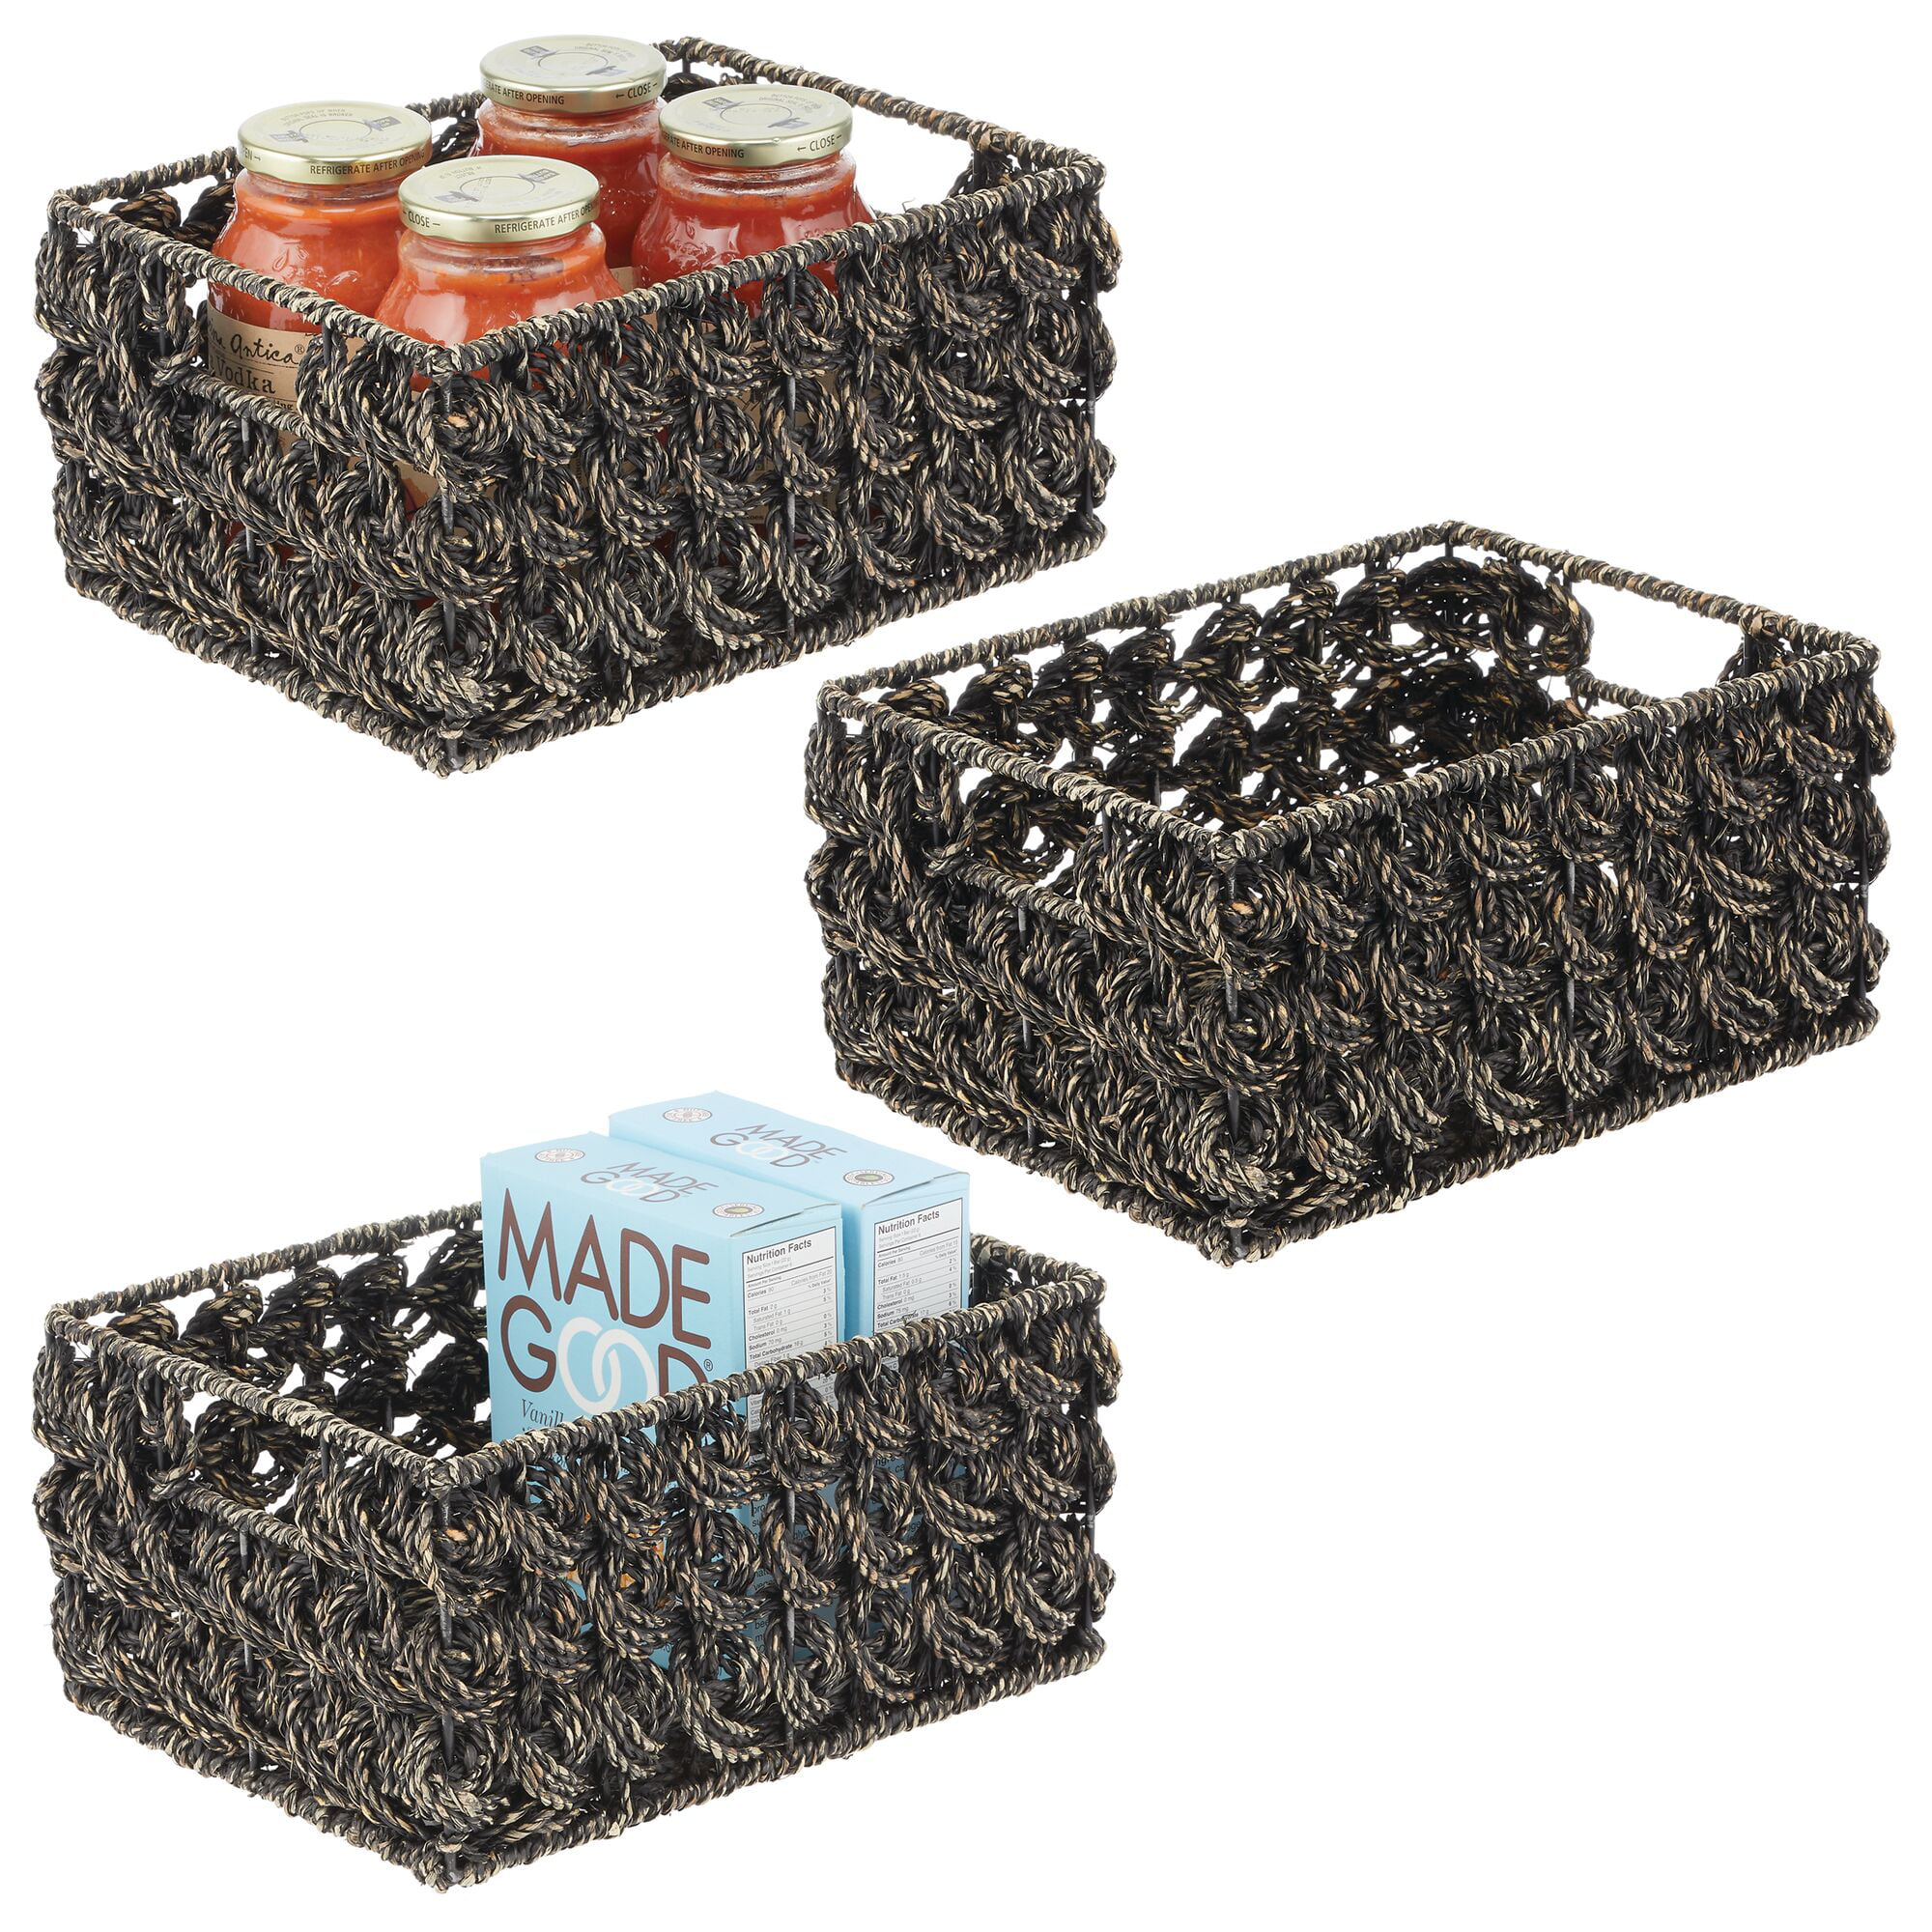 Glasses Box Closed Glass Basket Height 25 cm Glasses boxes jars baskets 